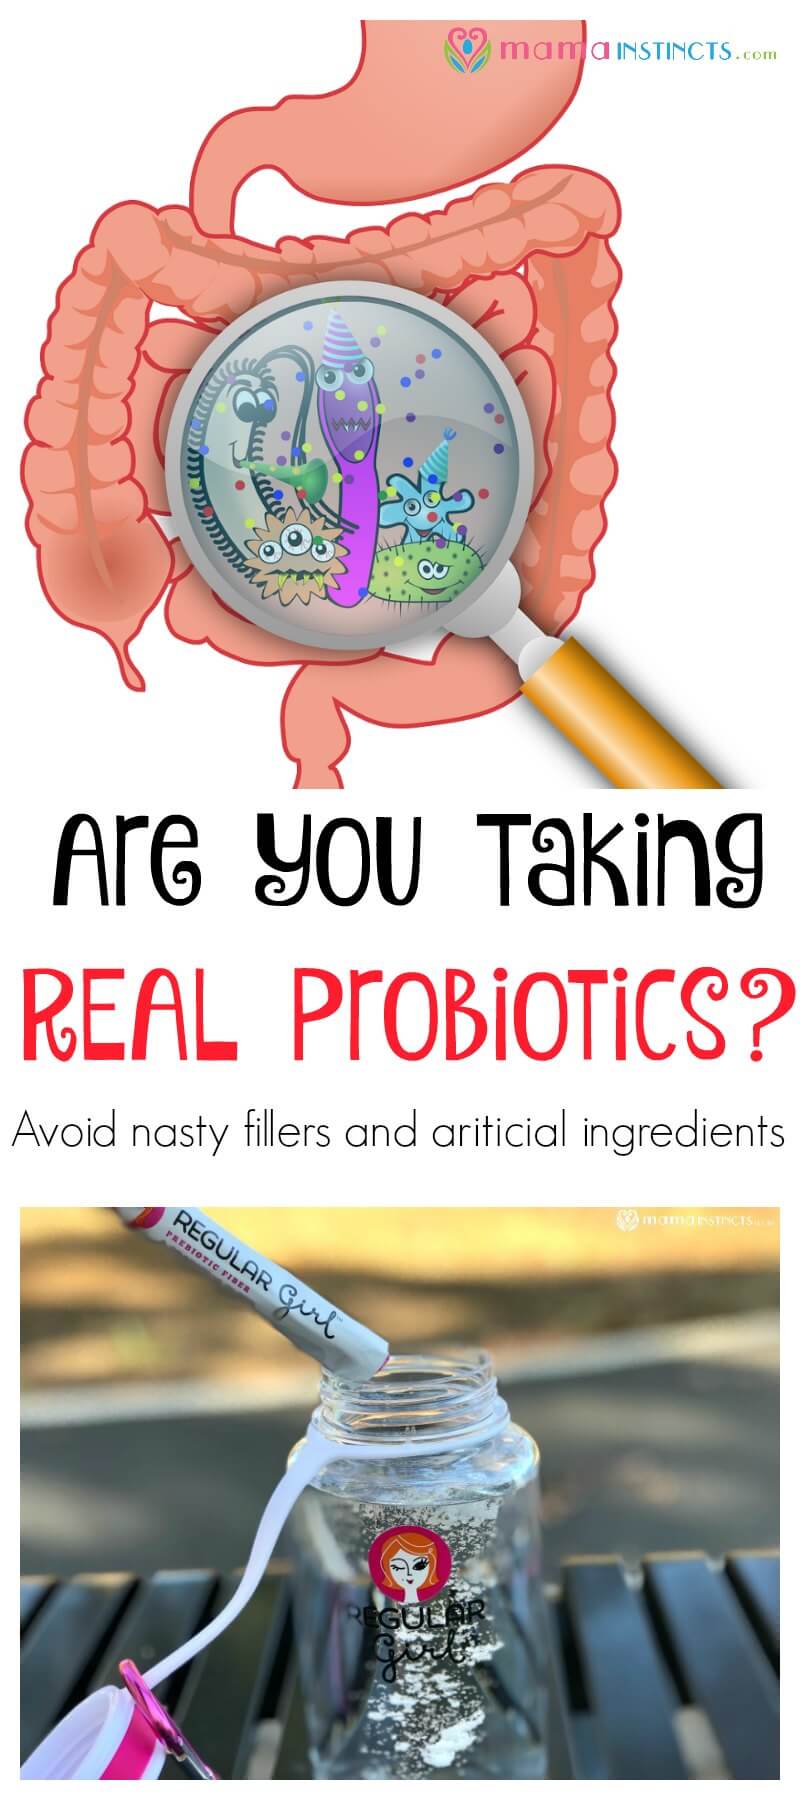 Probiotics are a supplement everyone should take because of its health benefits but did you know that a lot of probiotics contains sugary and not-so-healthy fillers? Learn how to spot a high quality probiotic and avoid fillers. #probiotics #supplements #cleanlabel